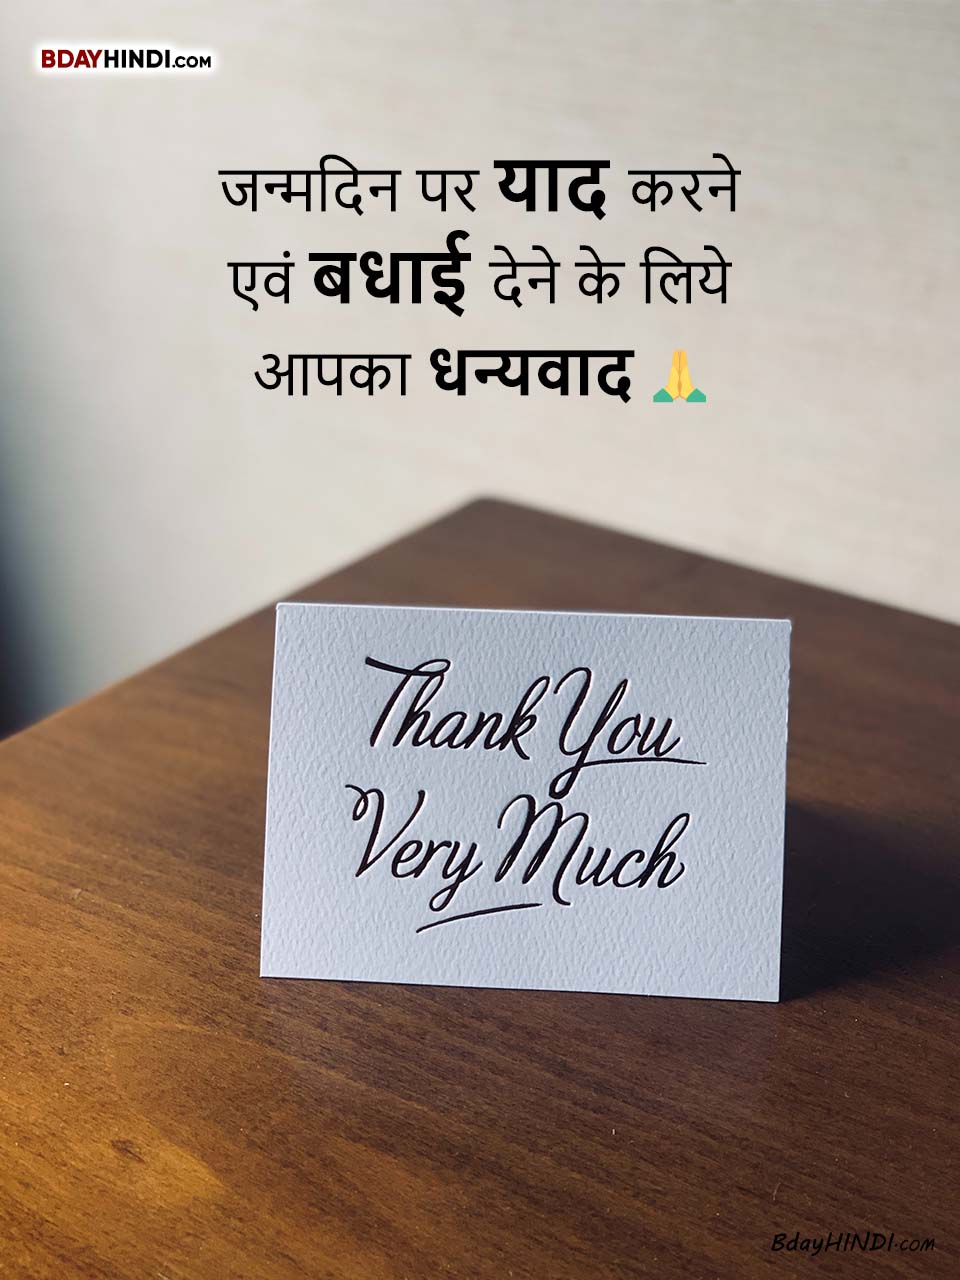 Thank You Reply to Birthday Wishes Images Hindi